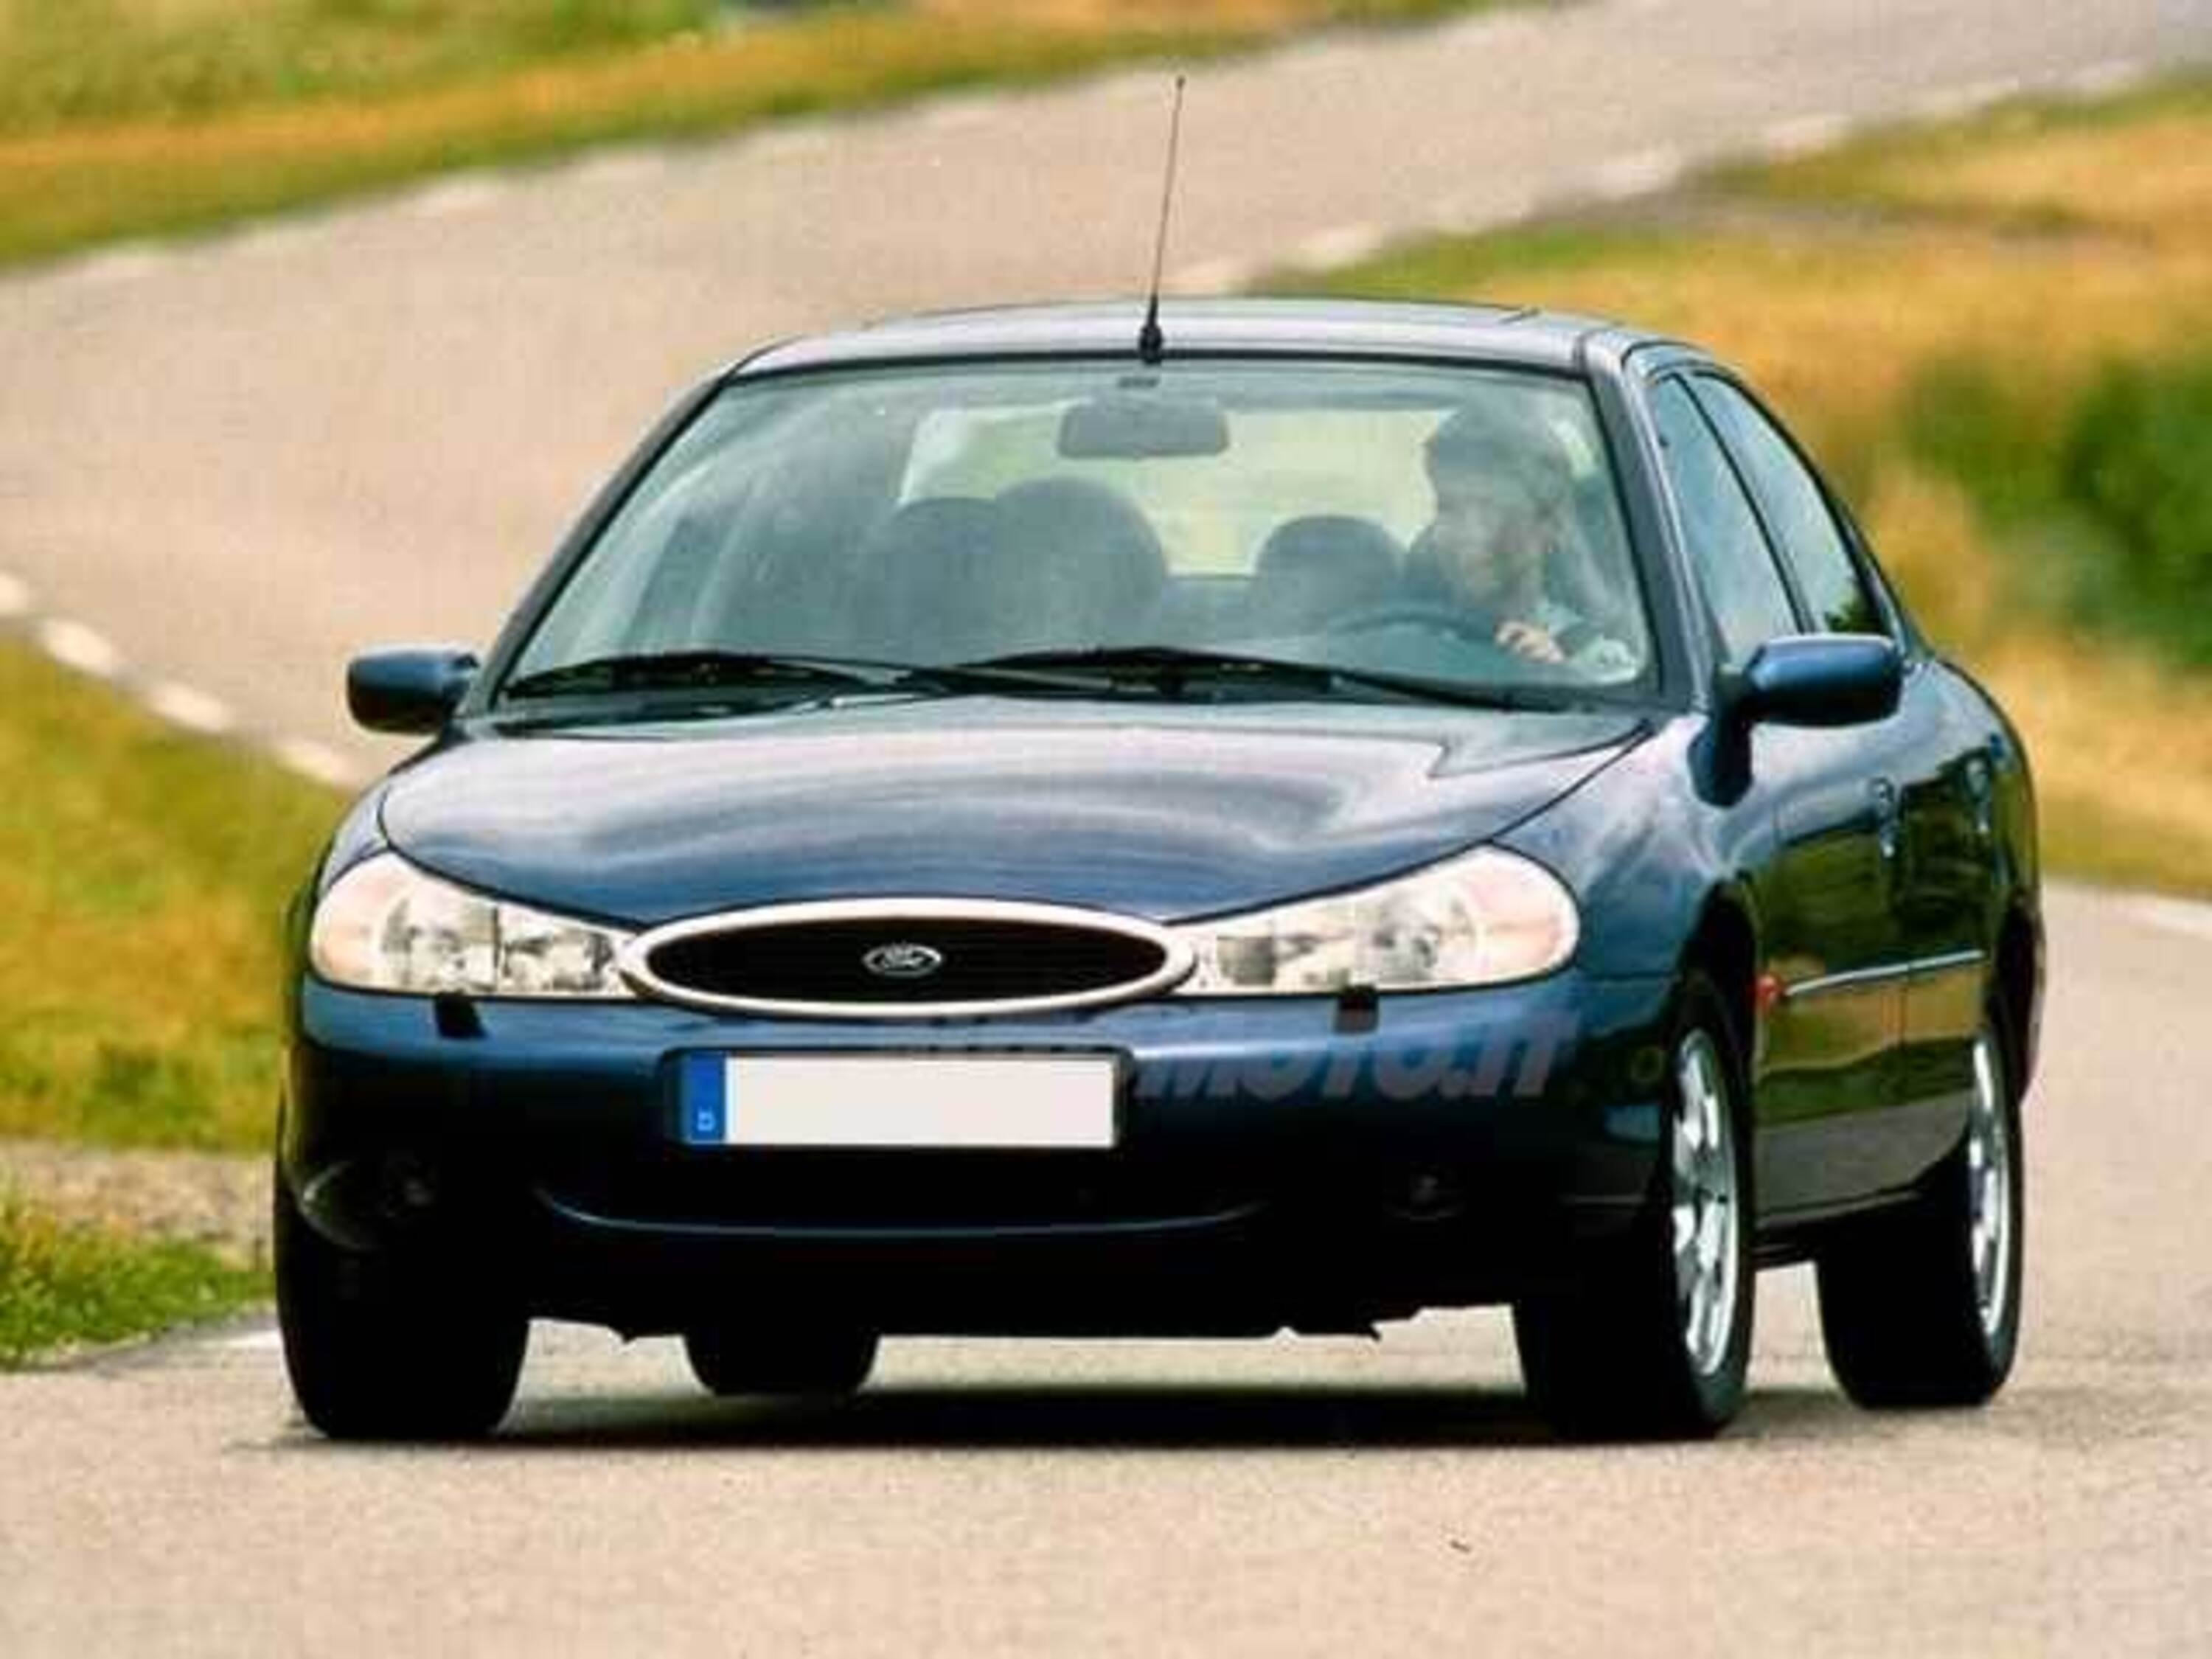 Ford Mondeo 1.8 turbodiesel cat 4 porte GT